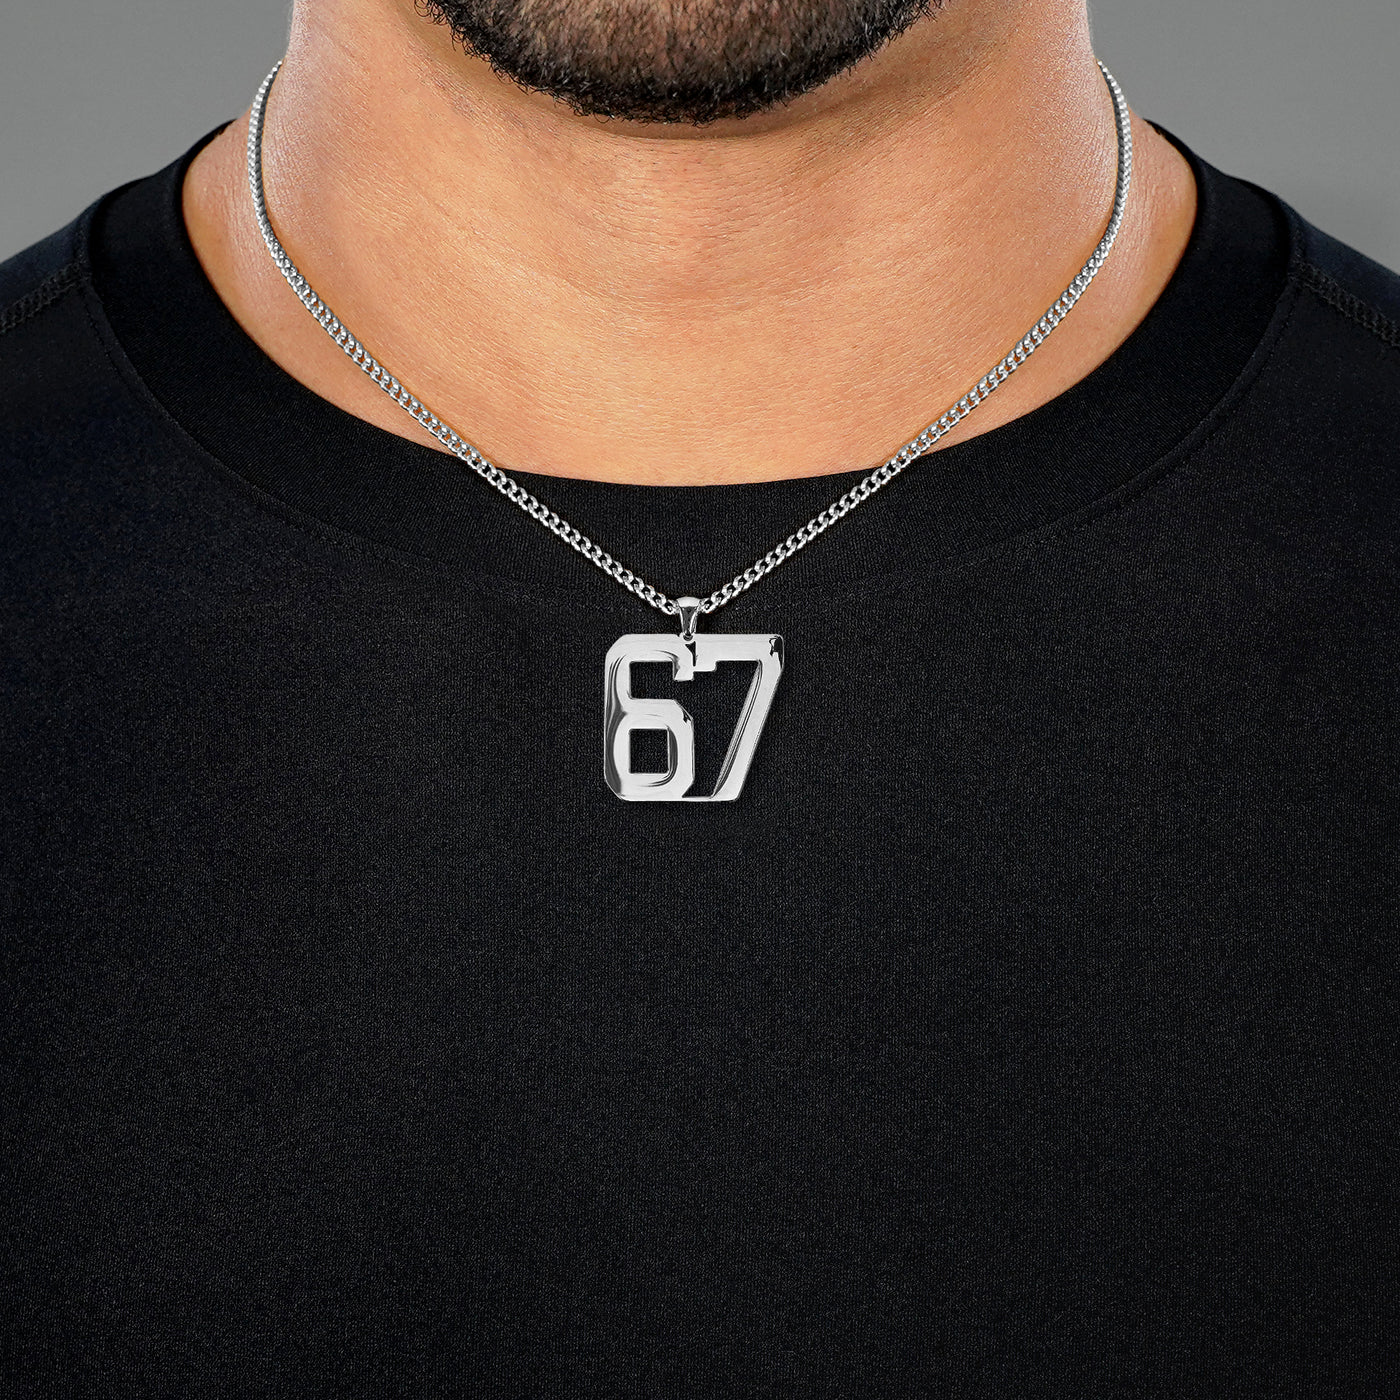 67 Number Pendant with Chain Necklace - Stainless Steel